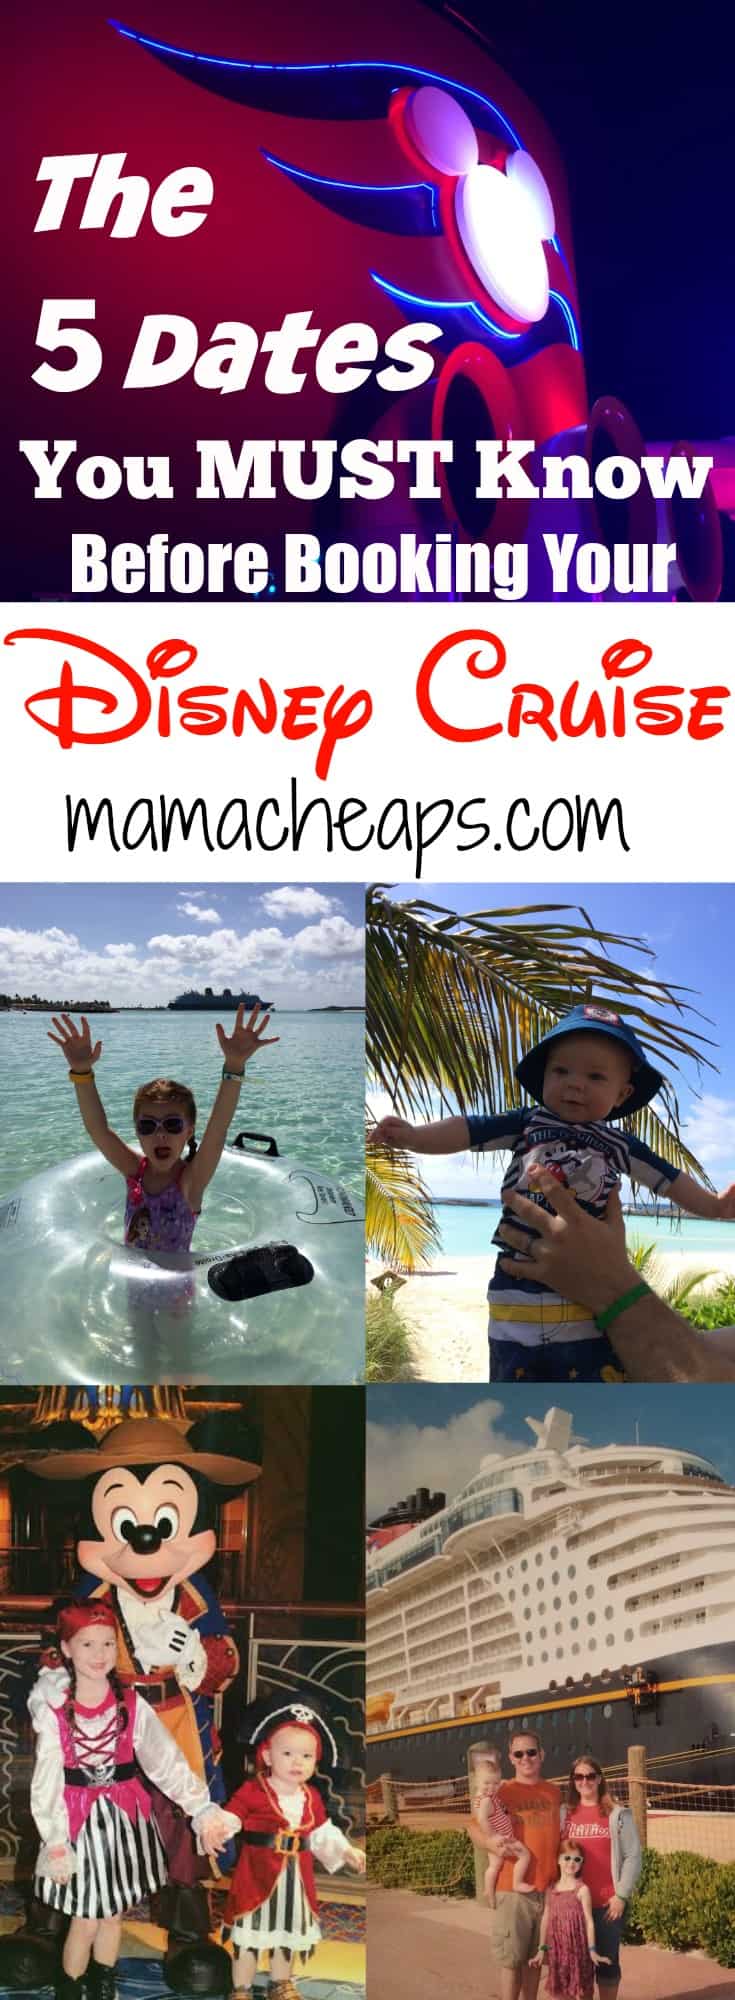 The 5 Dates You MUST Know Before Booking Your Disney Cruise